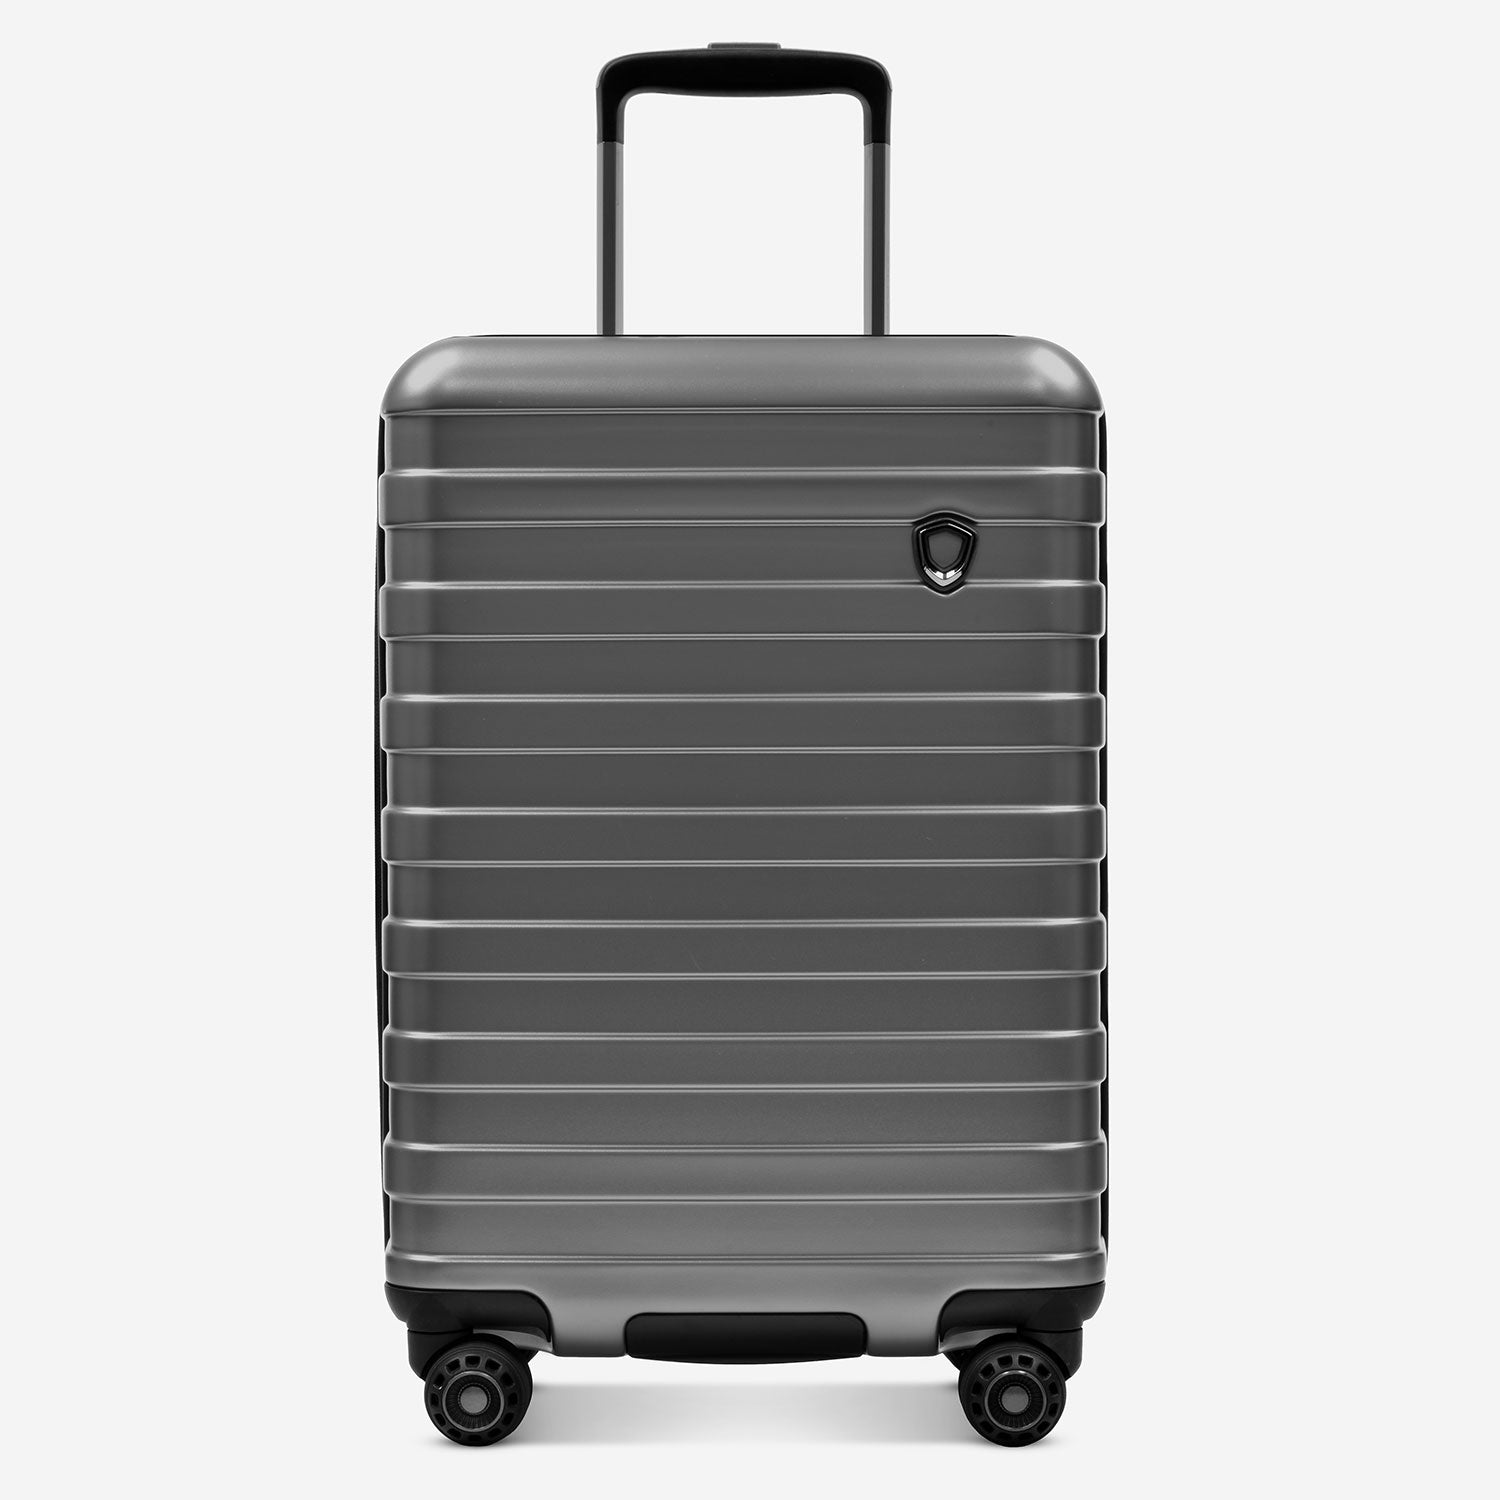 The Millennial Carry-On Spinner